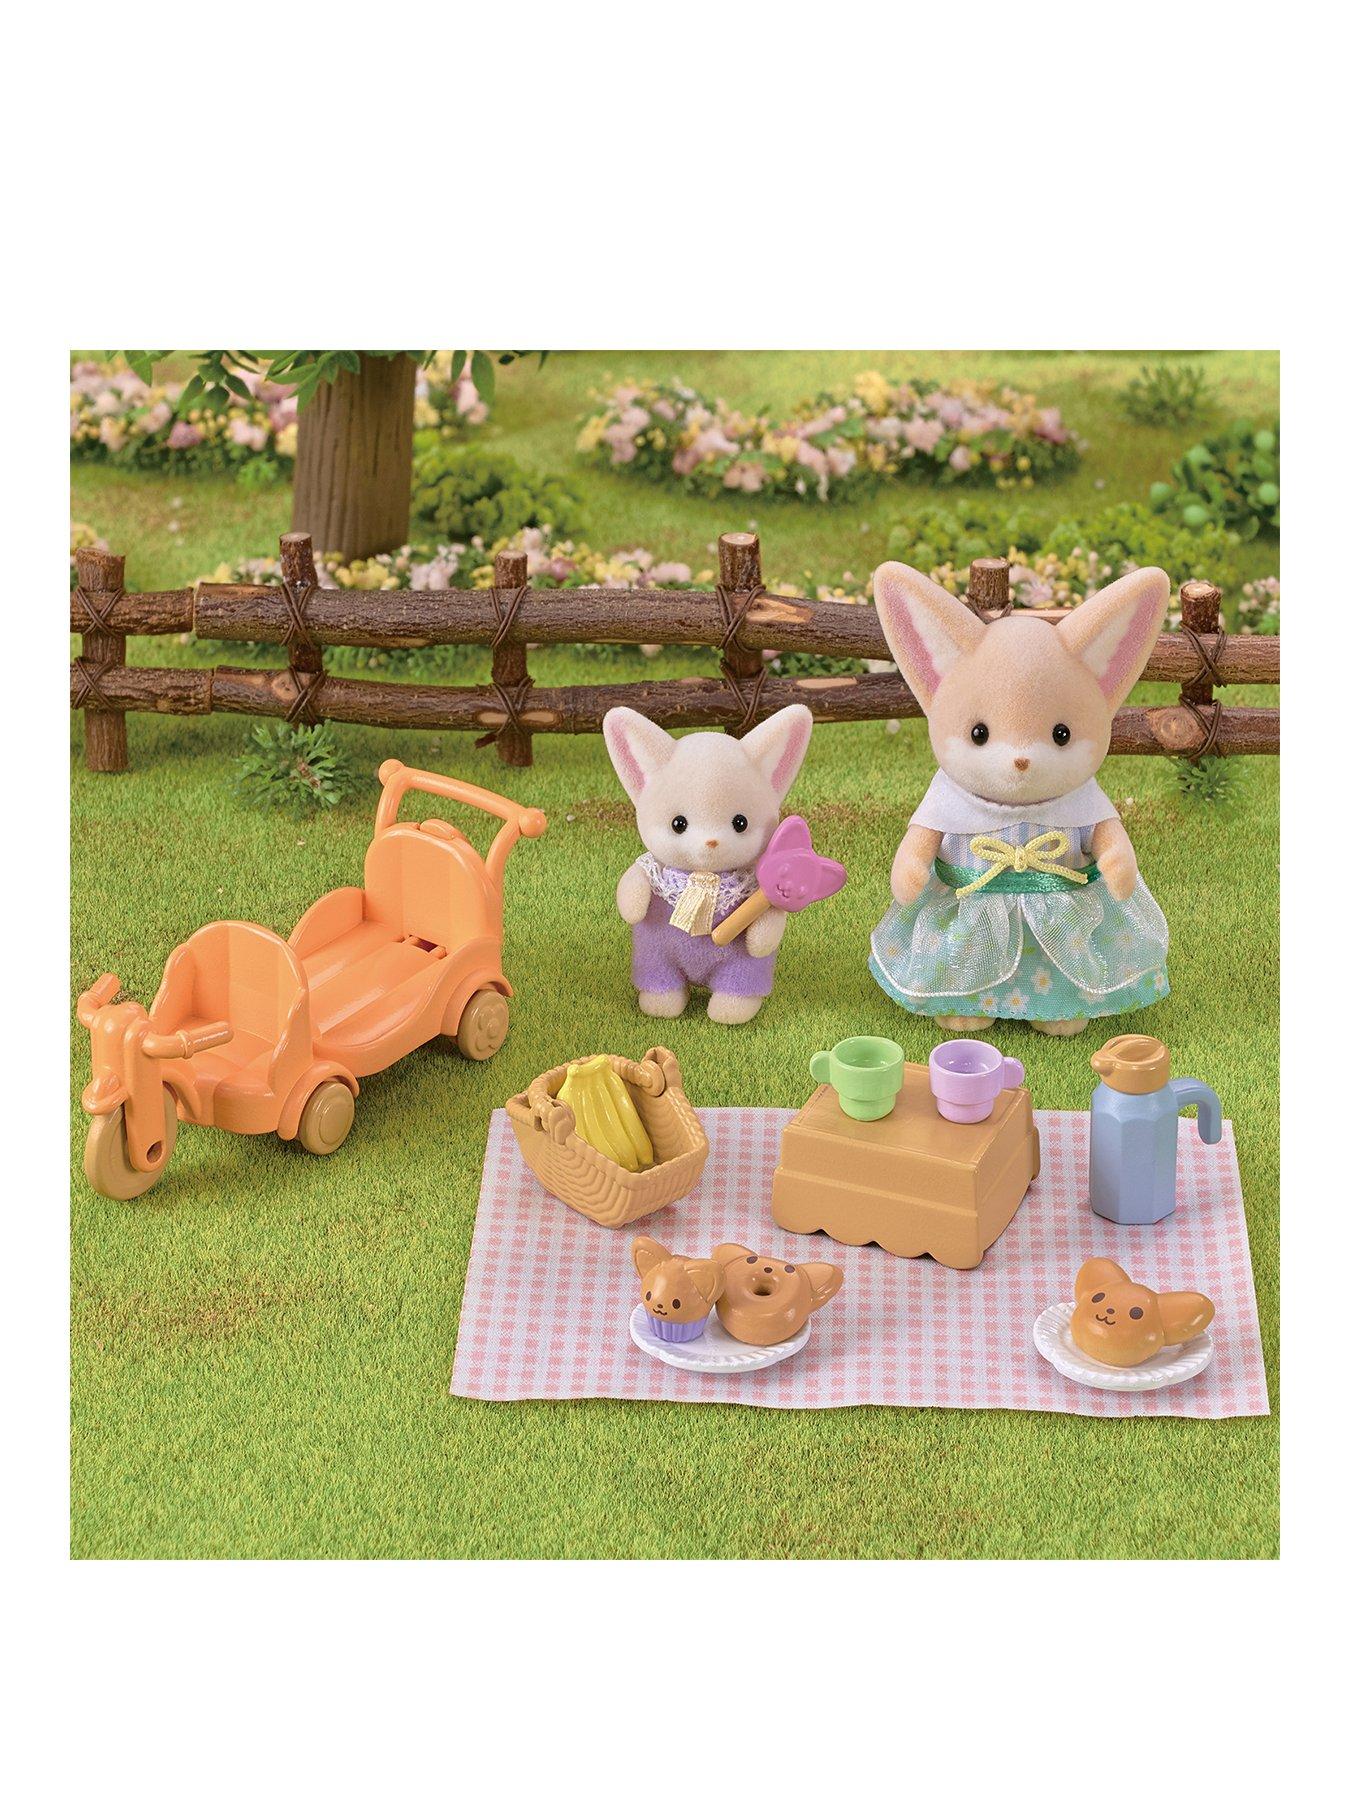 Used] SCHOOL FIELD TRIP SET S-07 Epoch Retired Sylvanian Families Calico  Critters